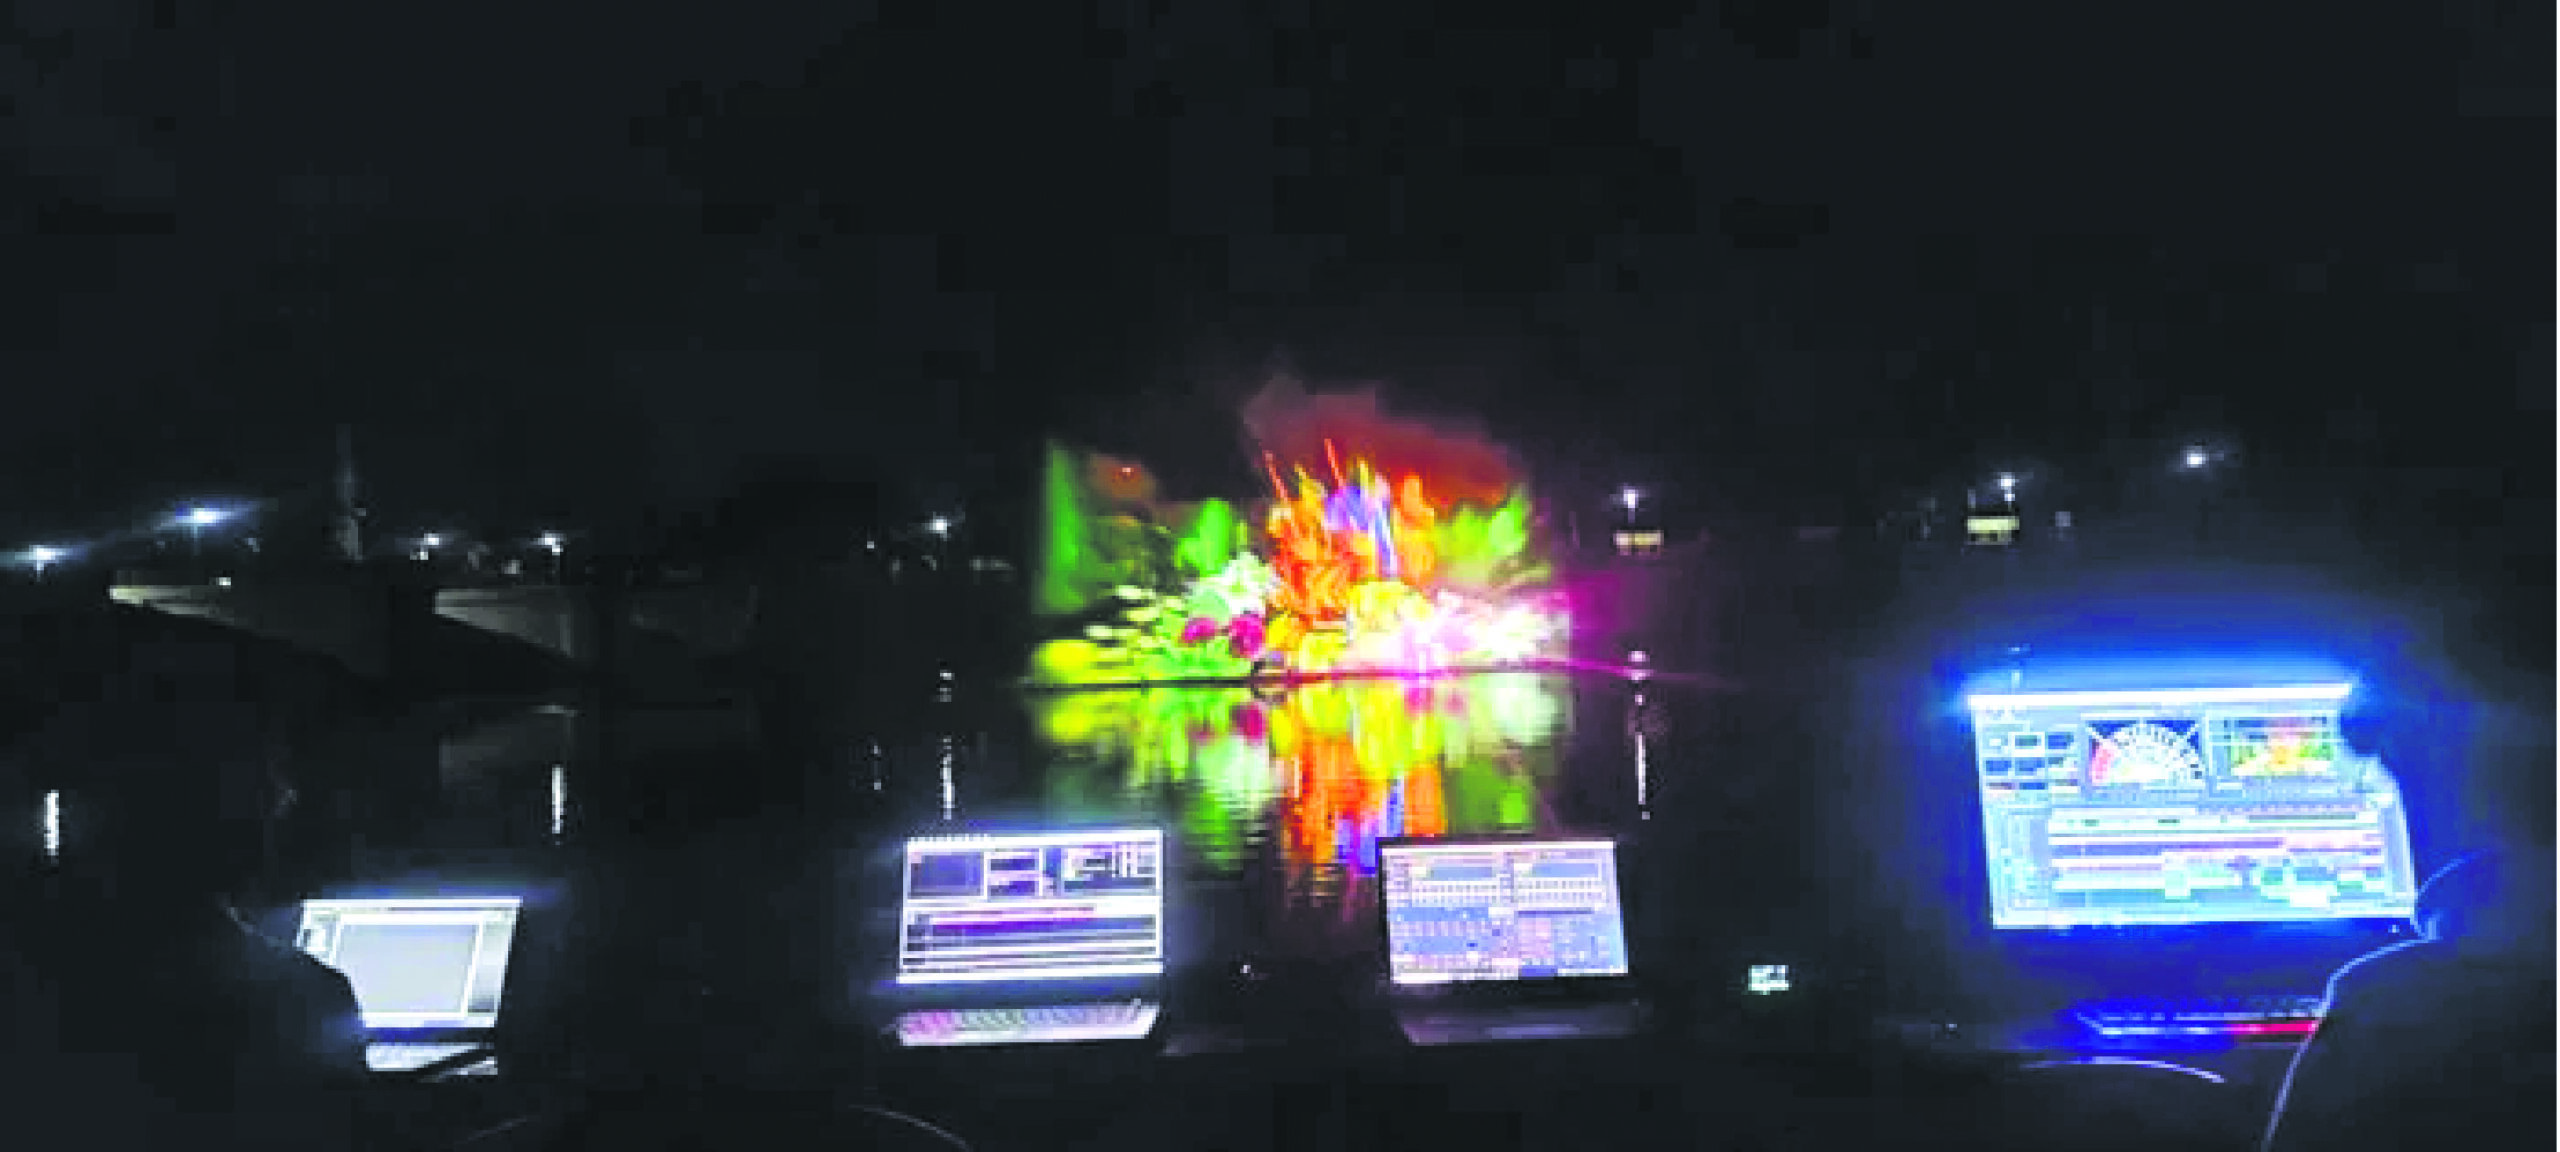 Axis Three Dee Studio unveils mesmerizing holographic water projection at Suraj Kund, Ayodhya